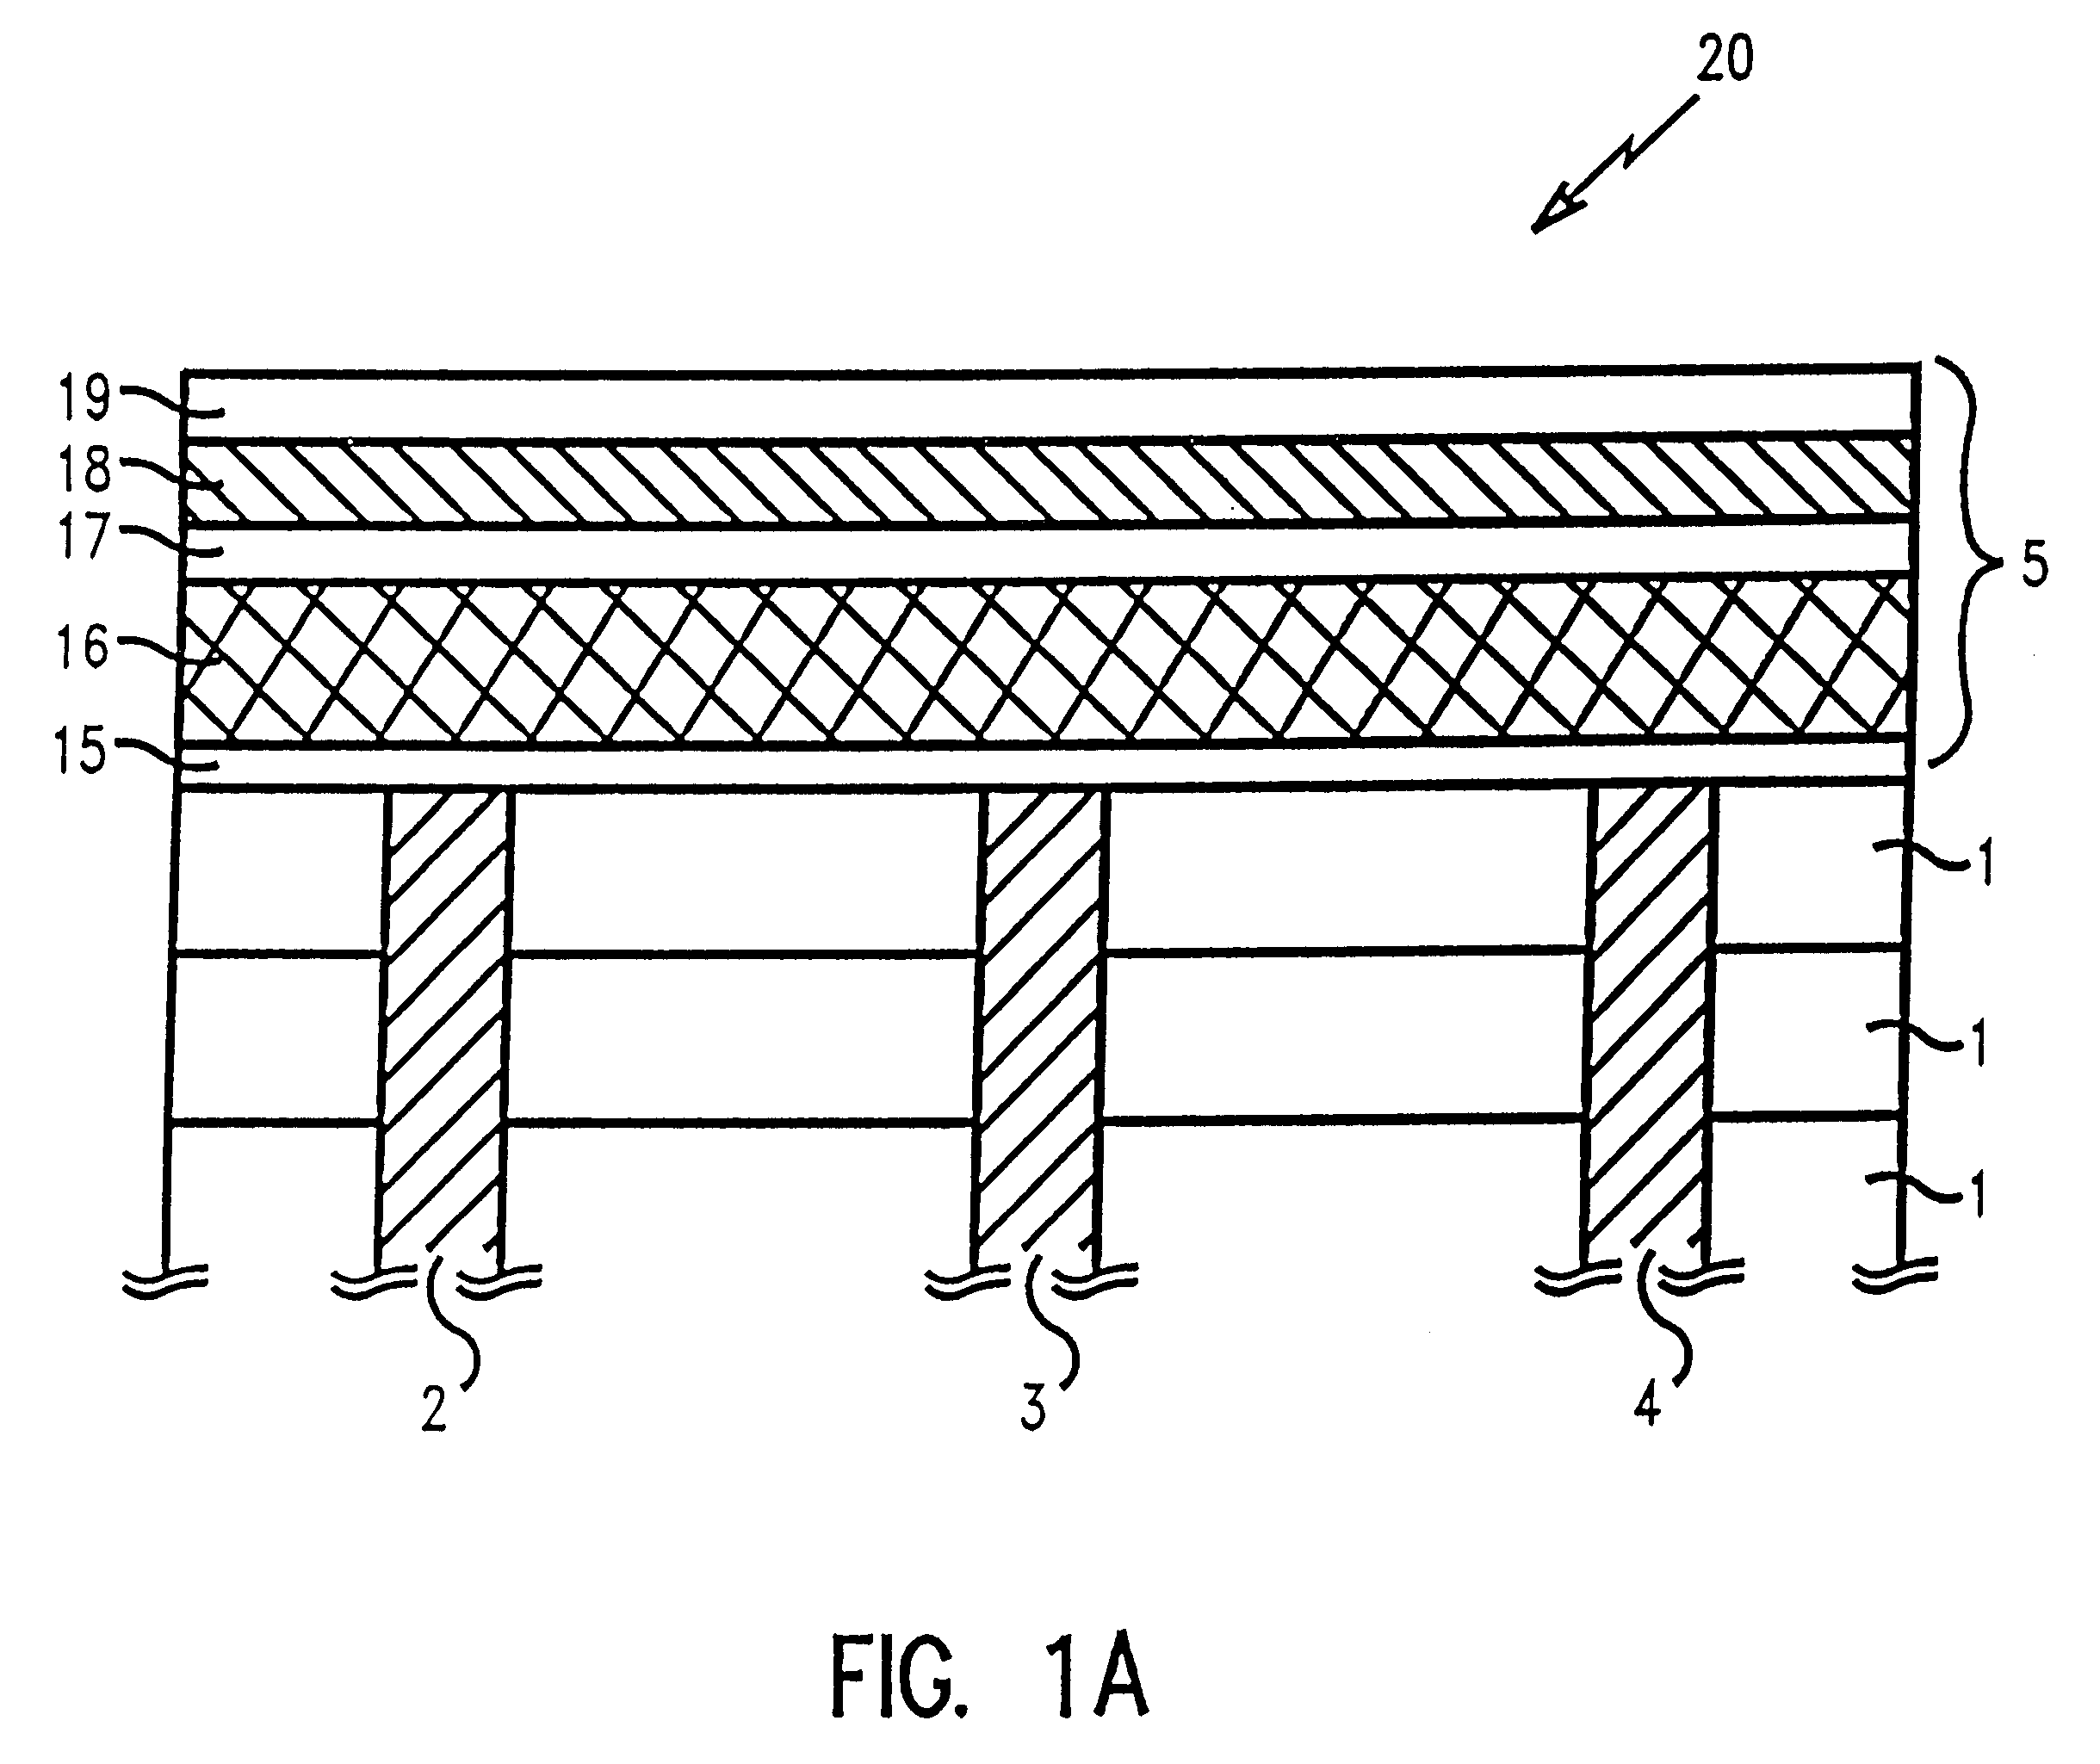 Method for a thin film multilayer capacitor